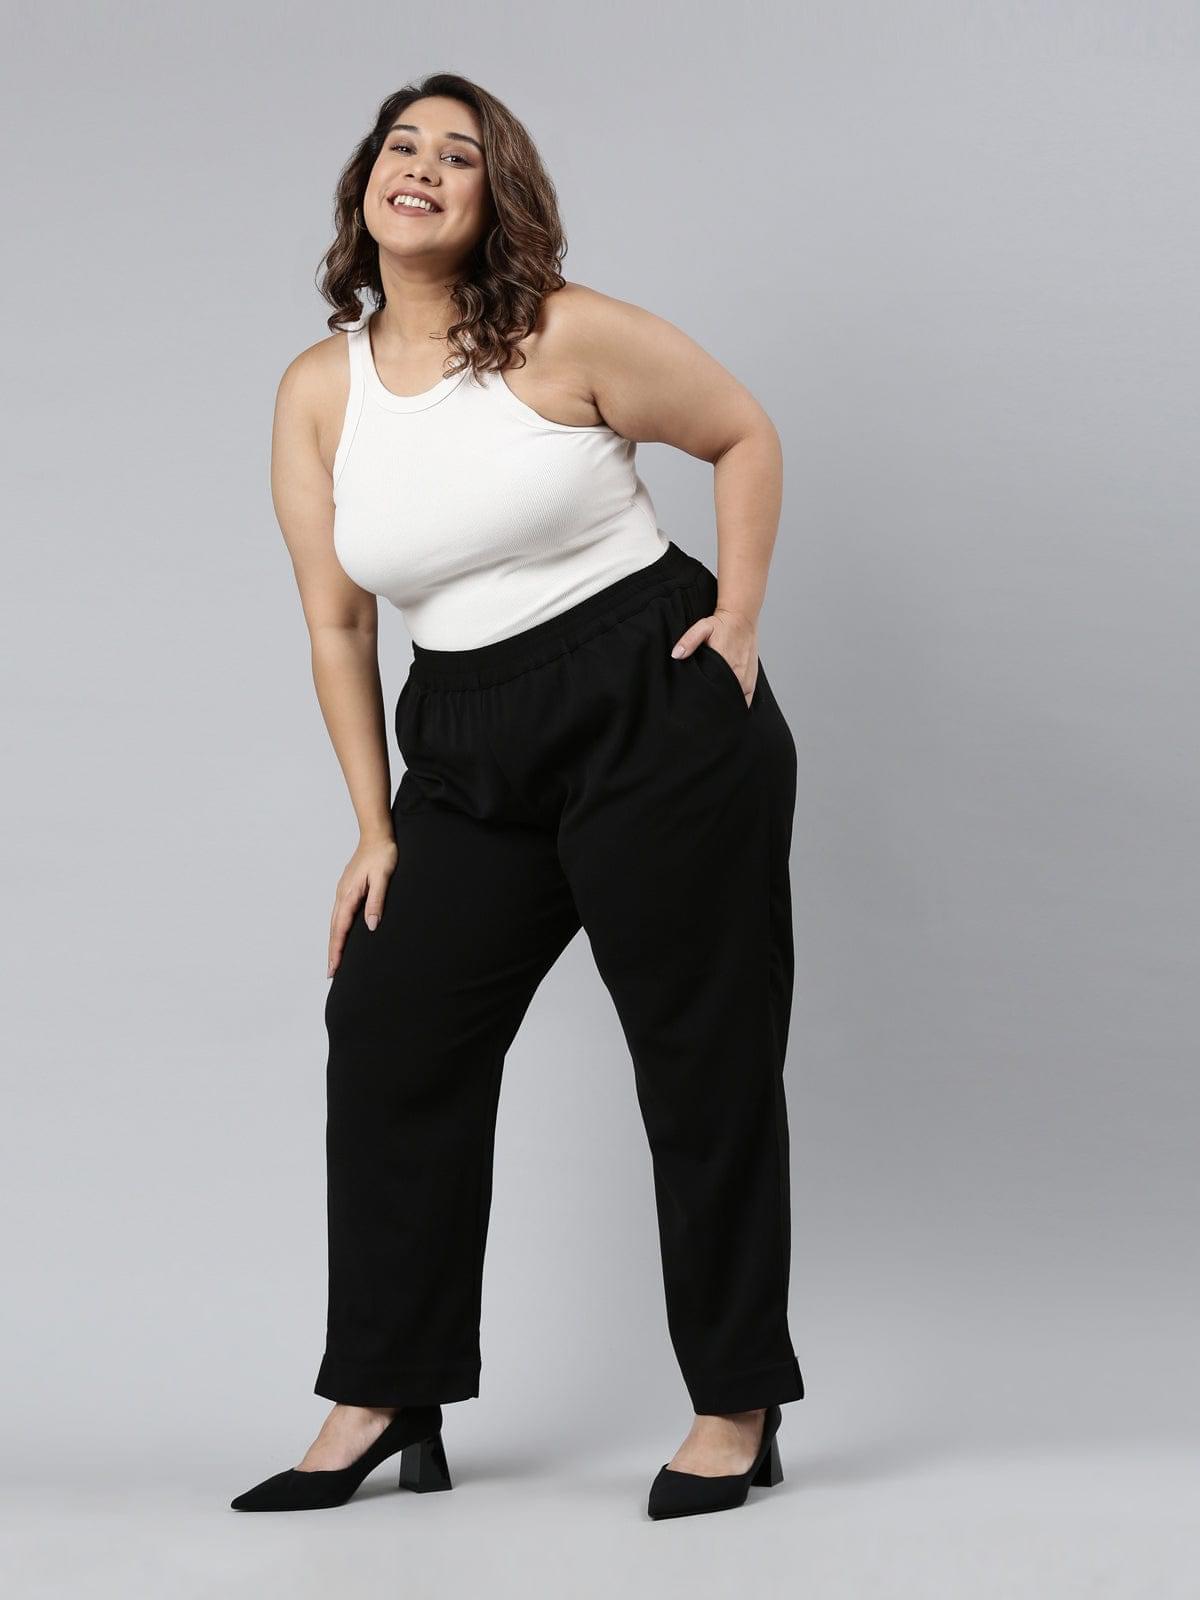 buy palazzo pants for women's and girls TheShaili online India at best prices